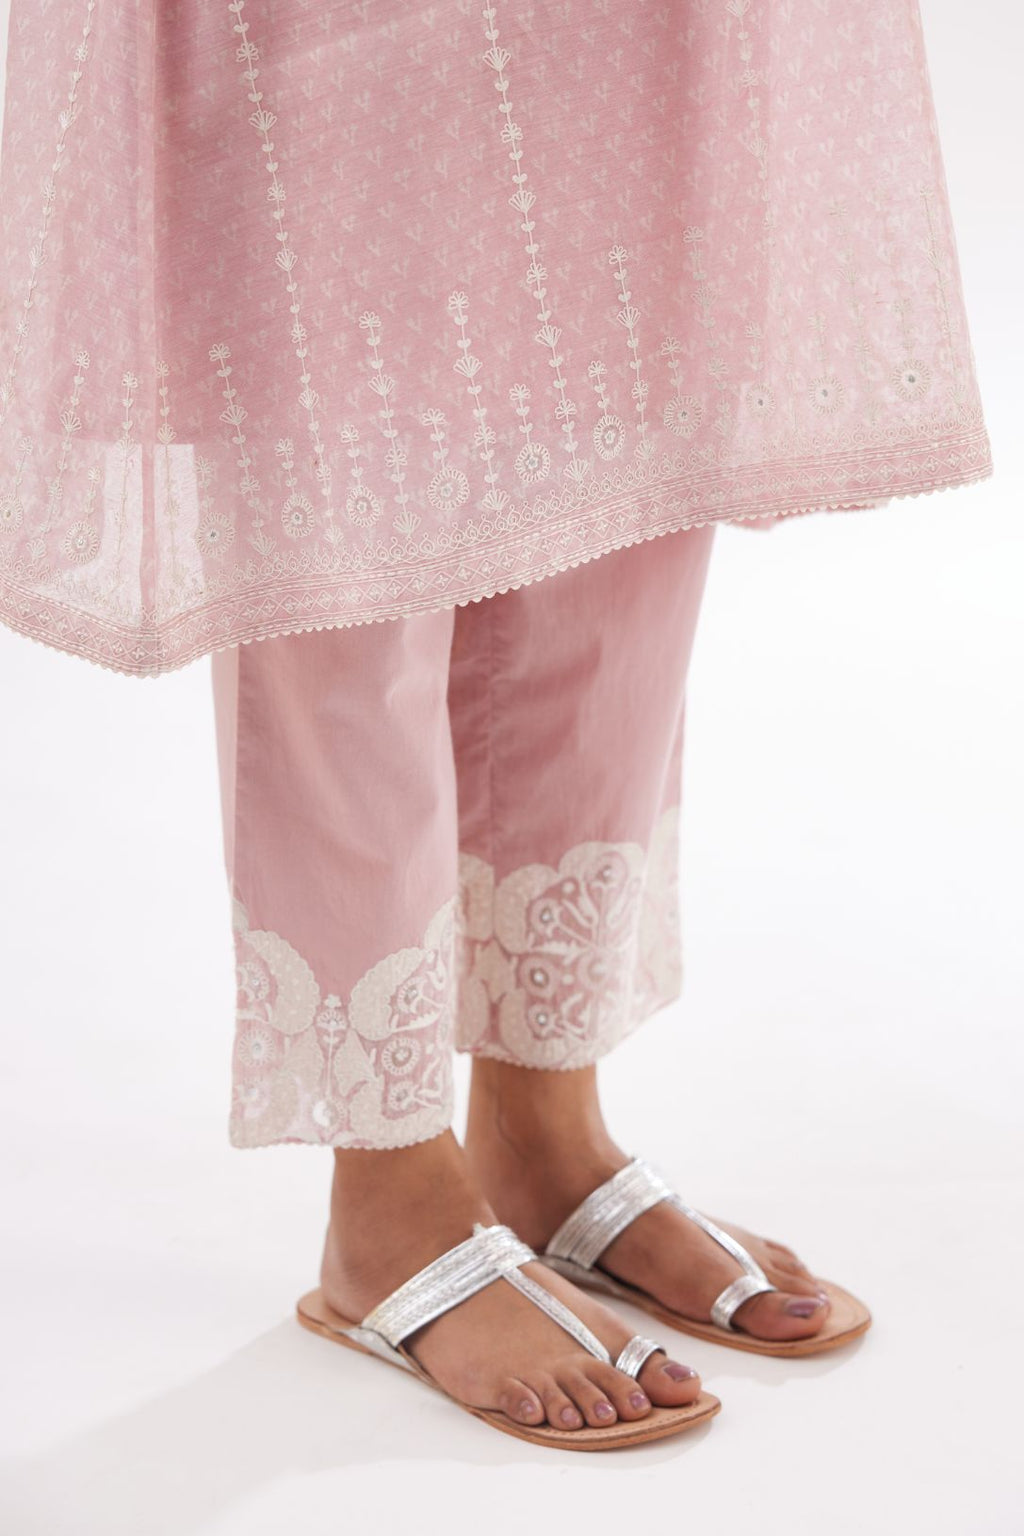 Pink hand block printed cotton chanderi A-line short kurta set with all over delicate dori and silk thread embroidery stripes.